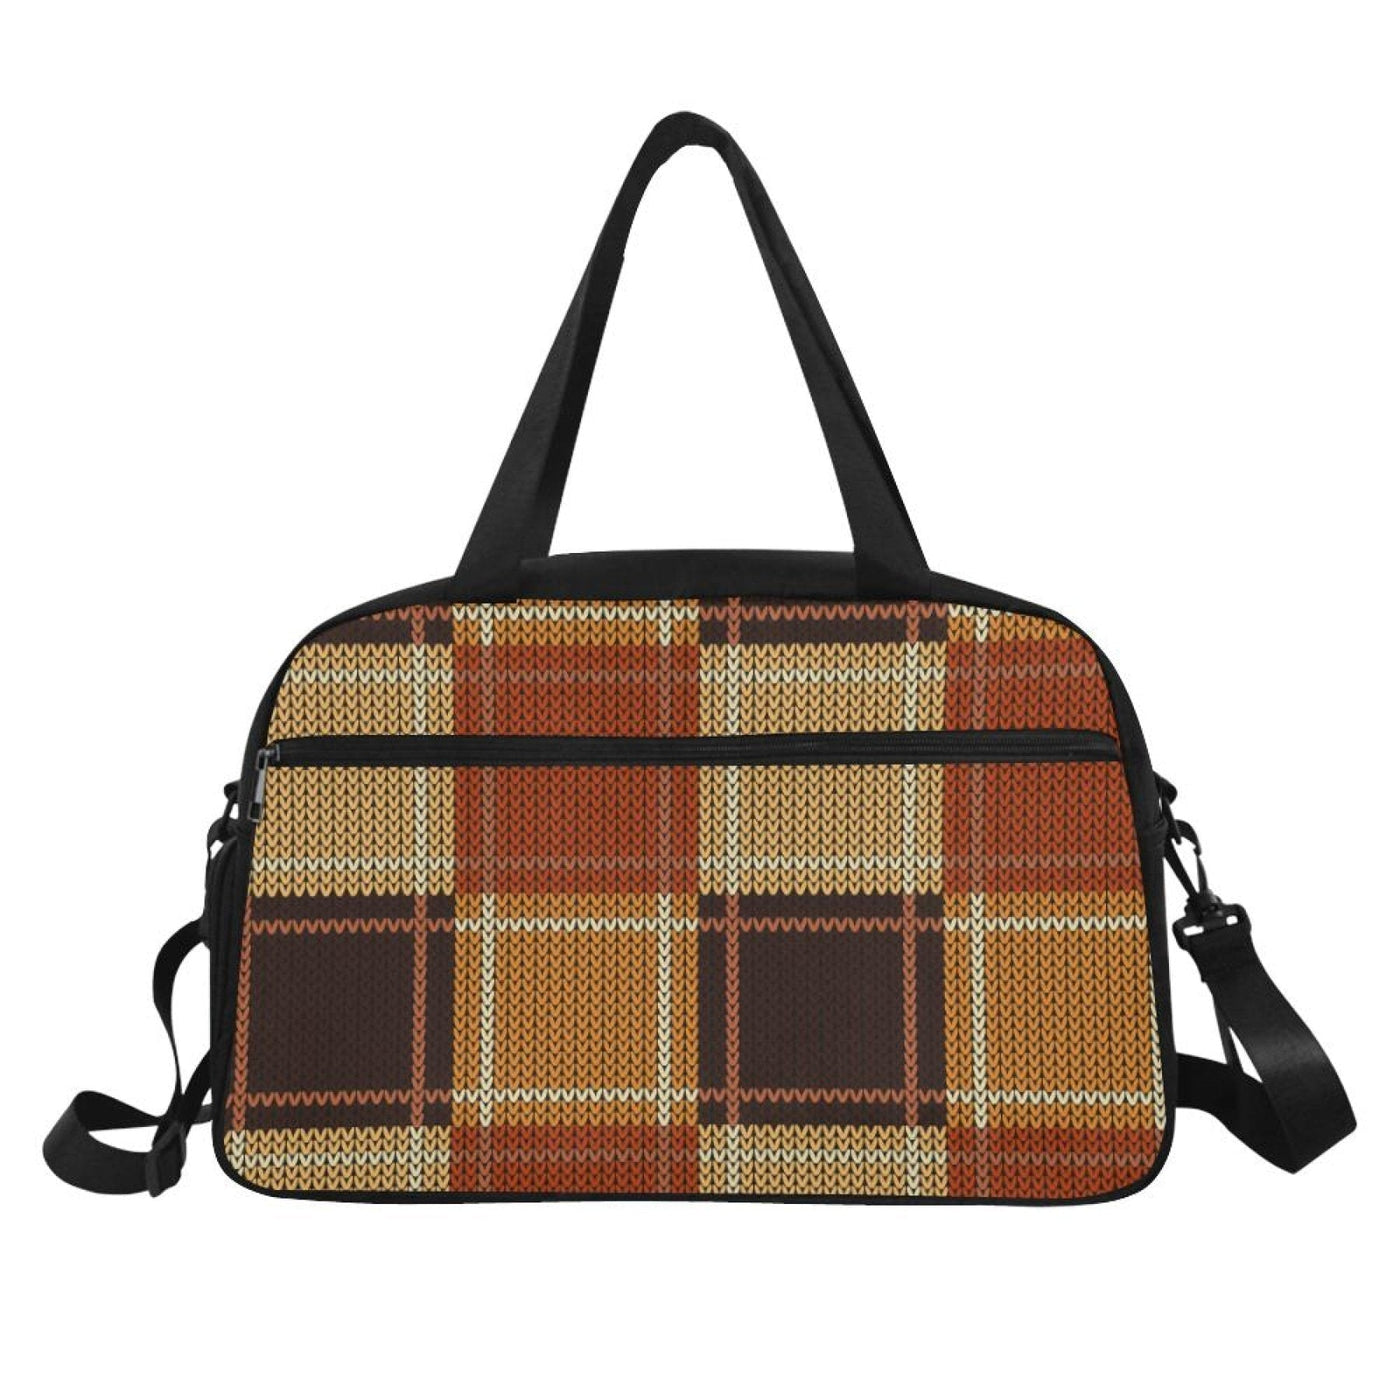 Travel Carry-on Bag / Brown And Beige Checkered Style - Bags | Travel Bags